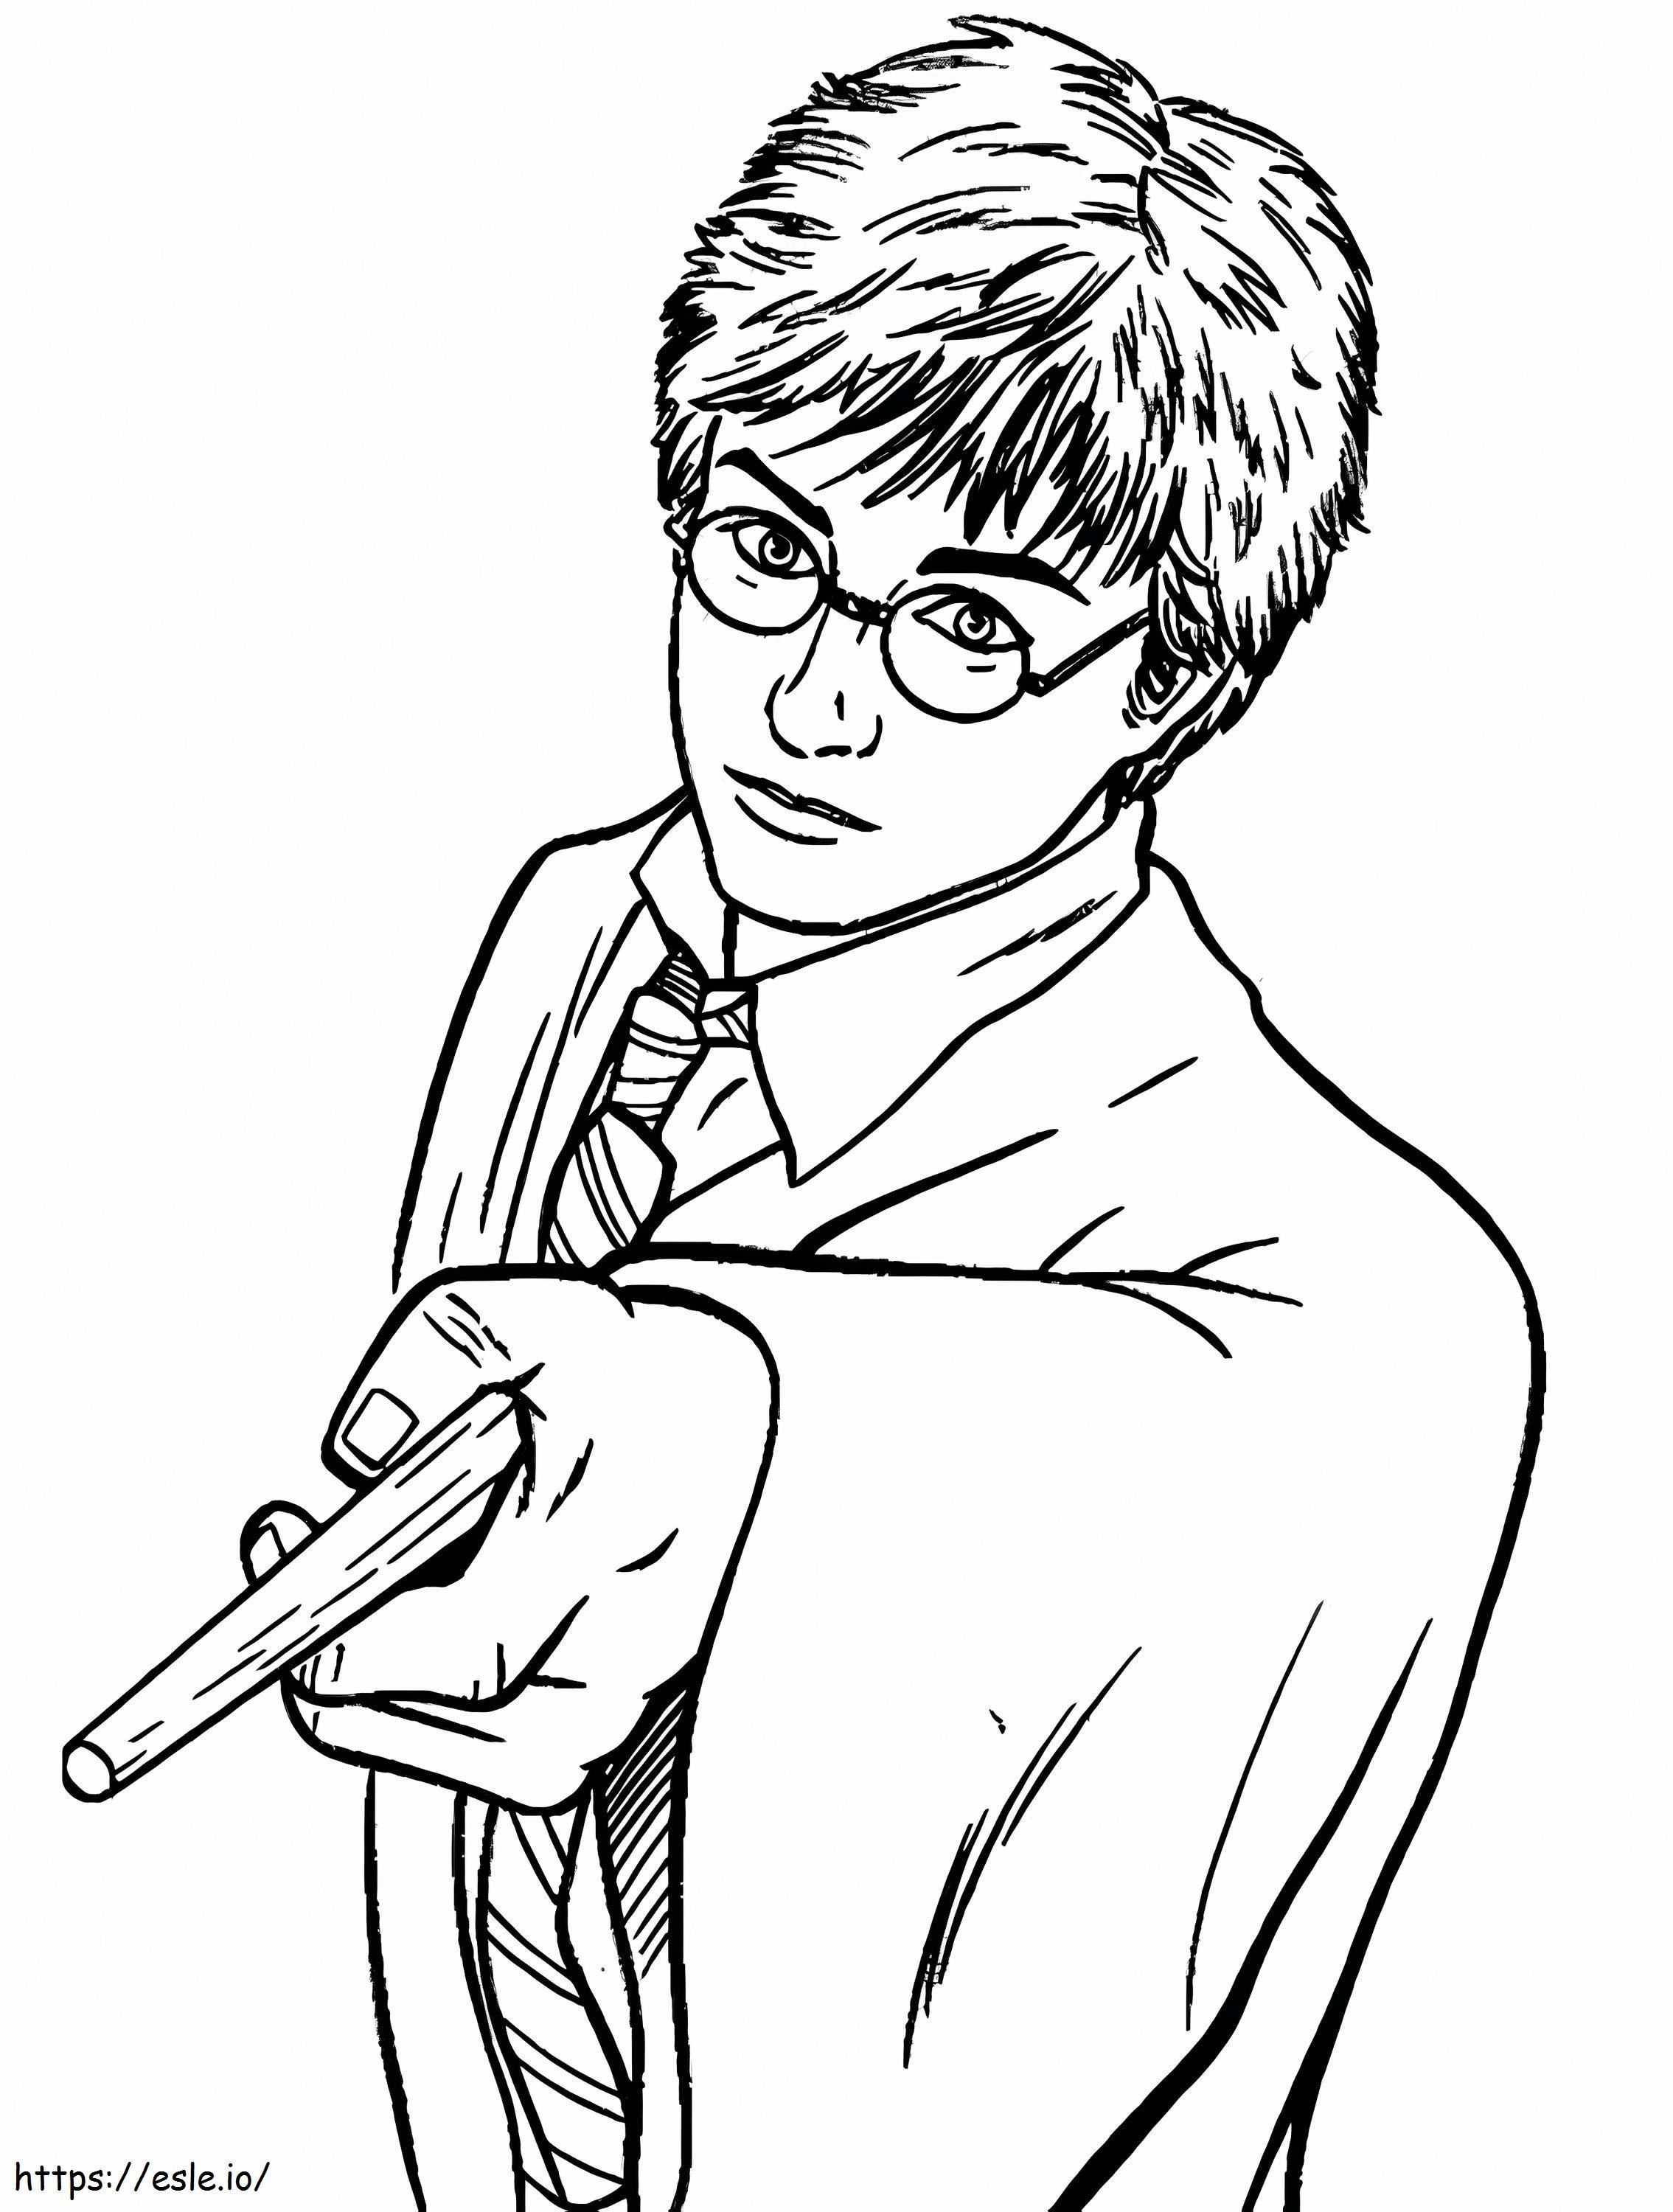 1583828623 Harry Potter Printable Free 33661 coloring page